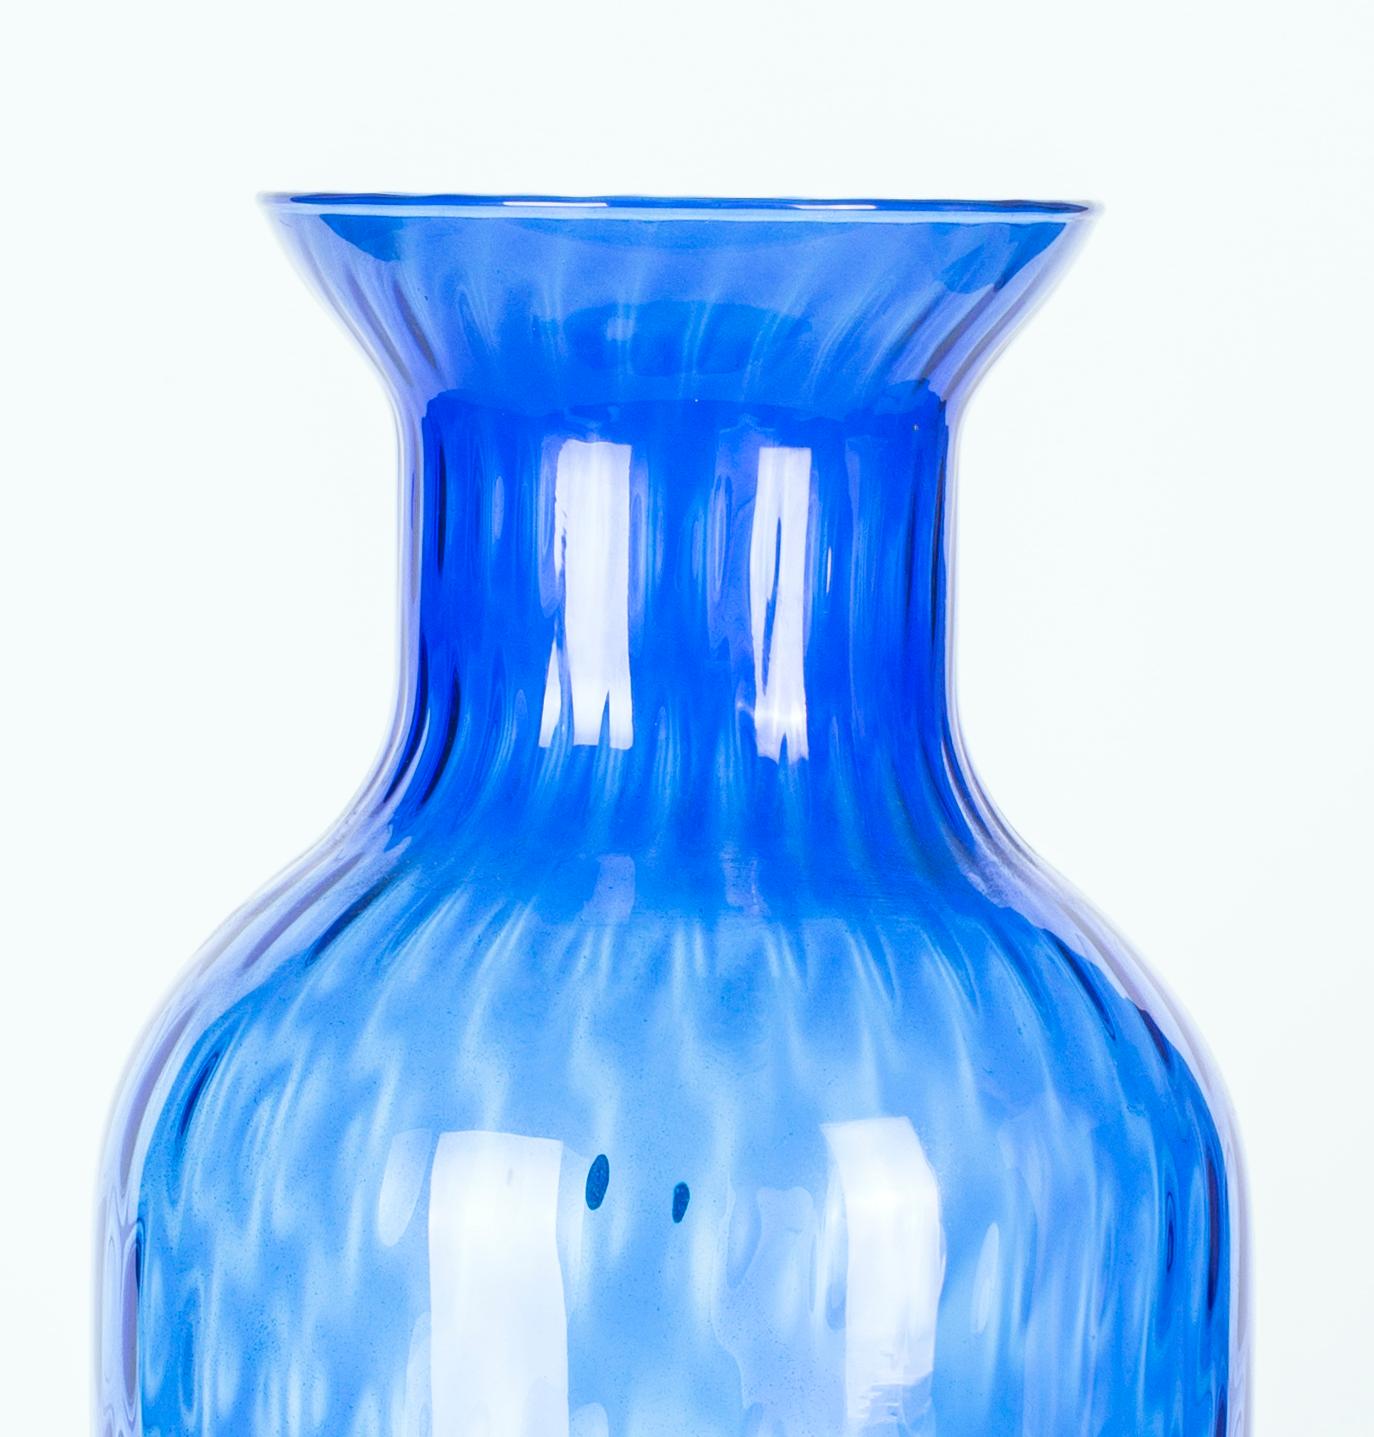 Crystal blue vase is a gorgeous glass decorative object, realized during the 1970s.

A very elegant bright blue colored vase.

On side label of Piombo Crystal.

This large vase is perfect for display as is, or with flowers or other decorative